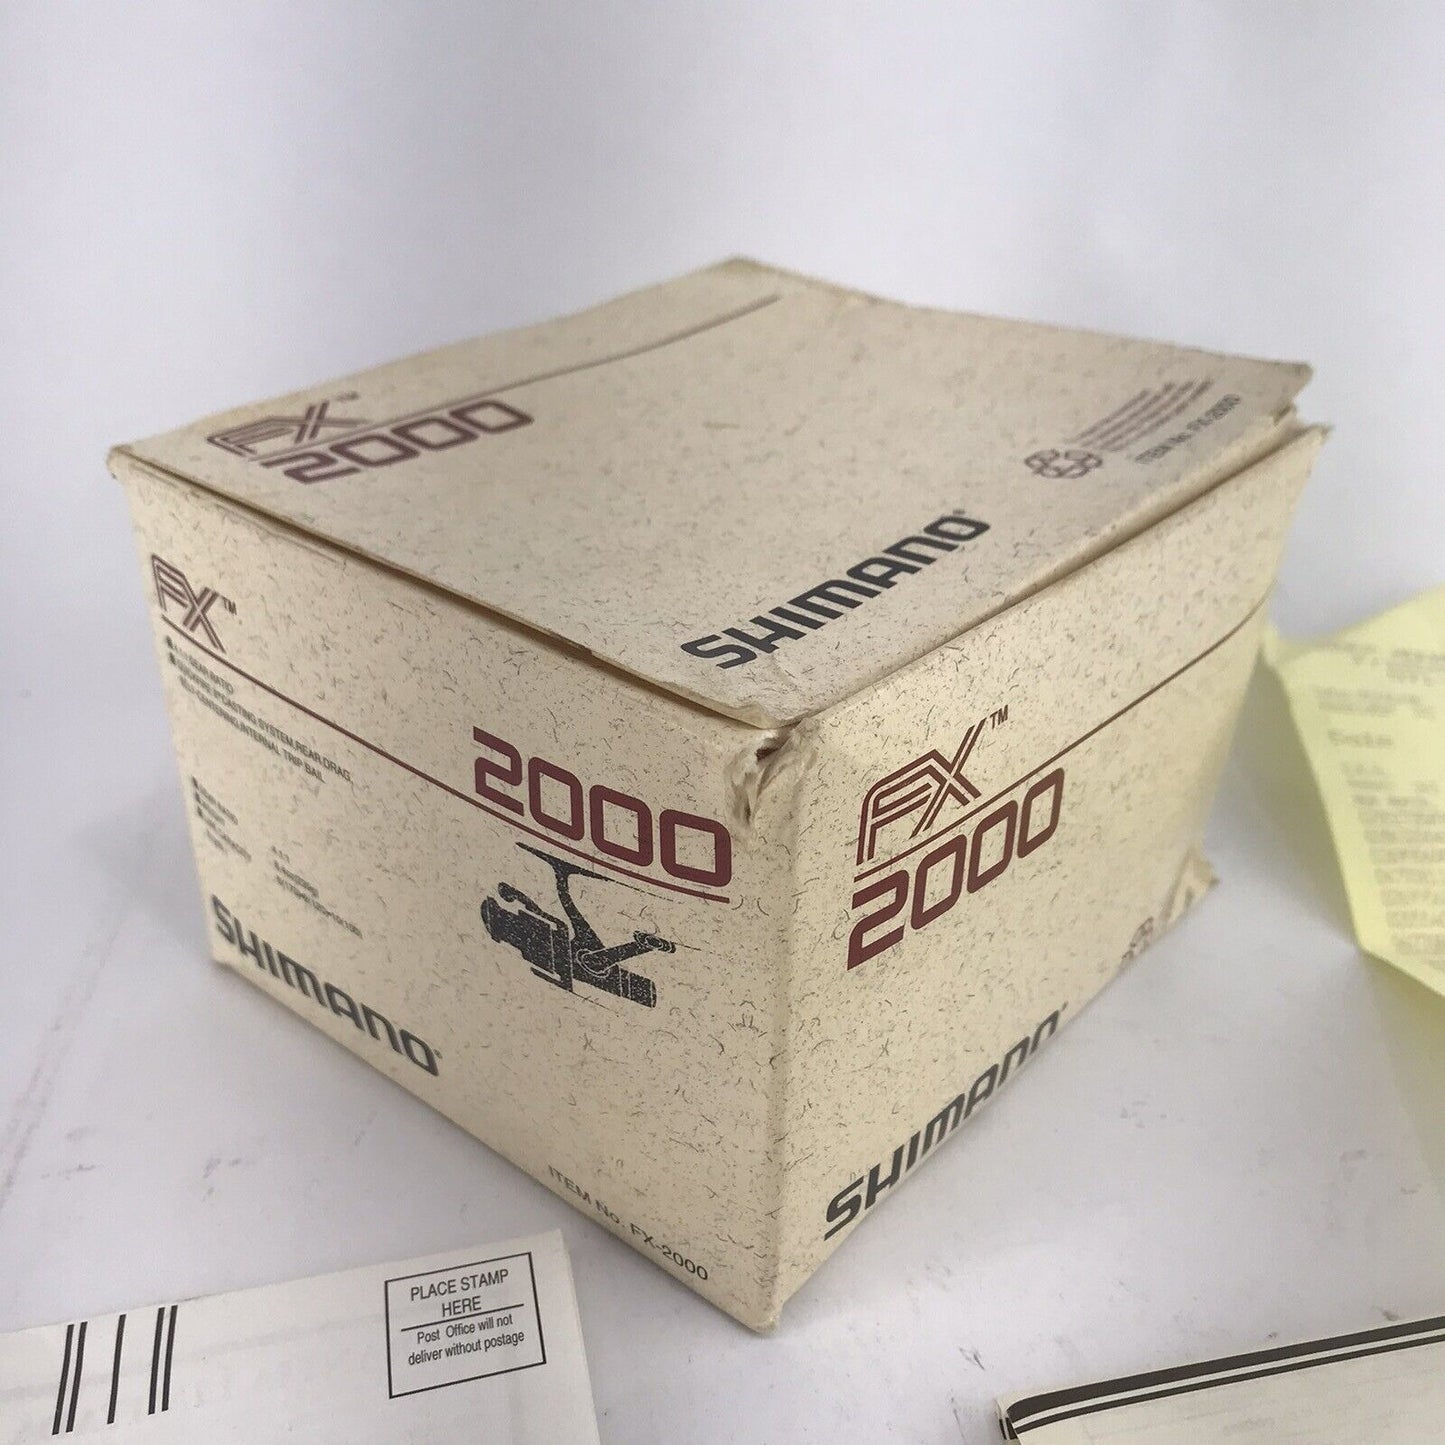 Shimano FX 2000 Box w/ Papers, NO REEL- BOX ONLY